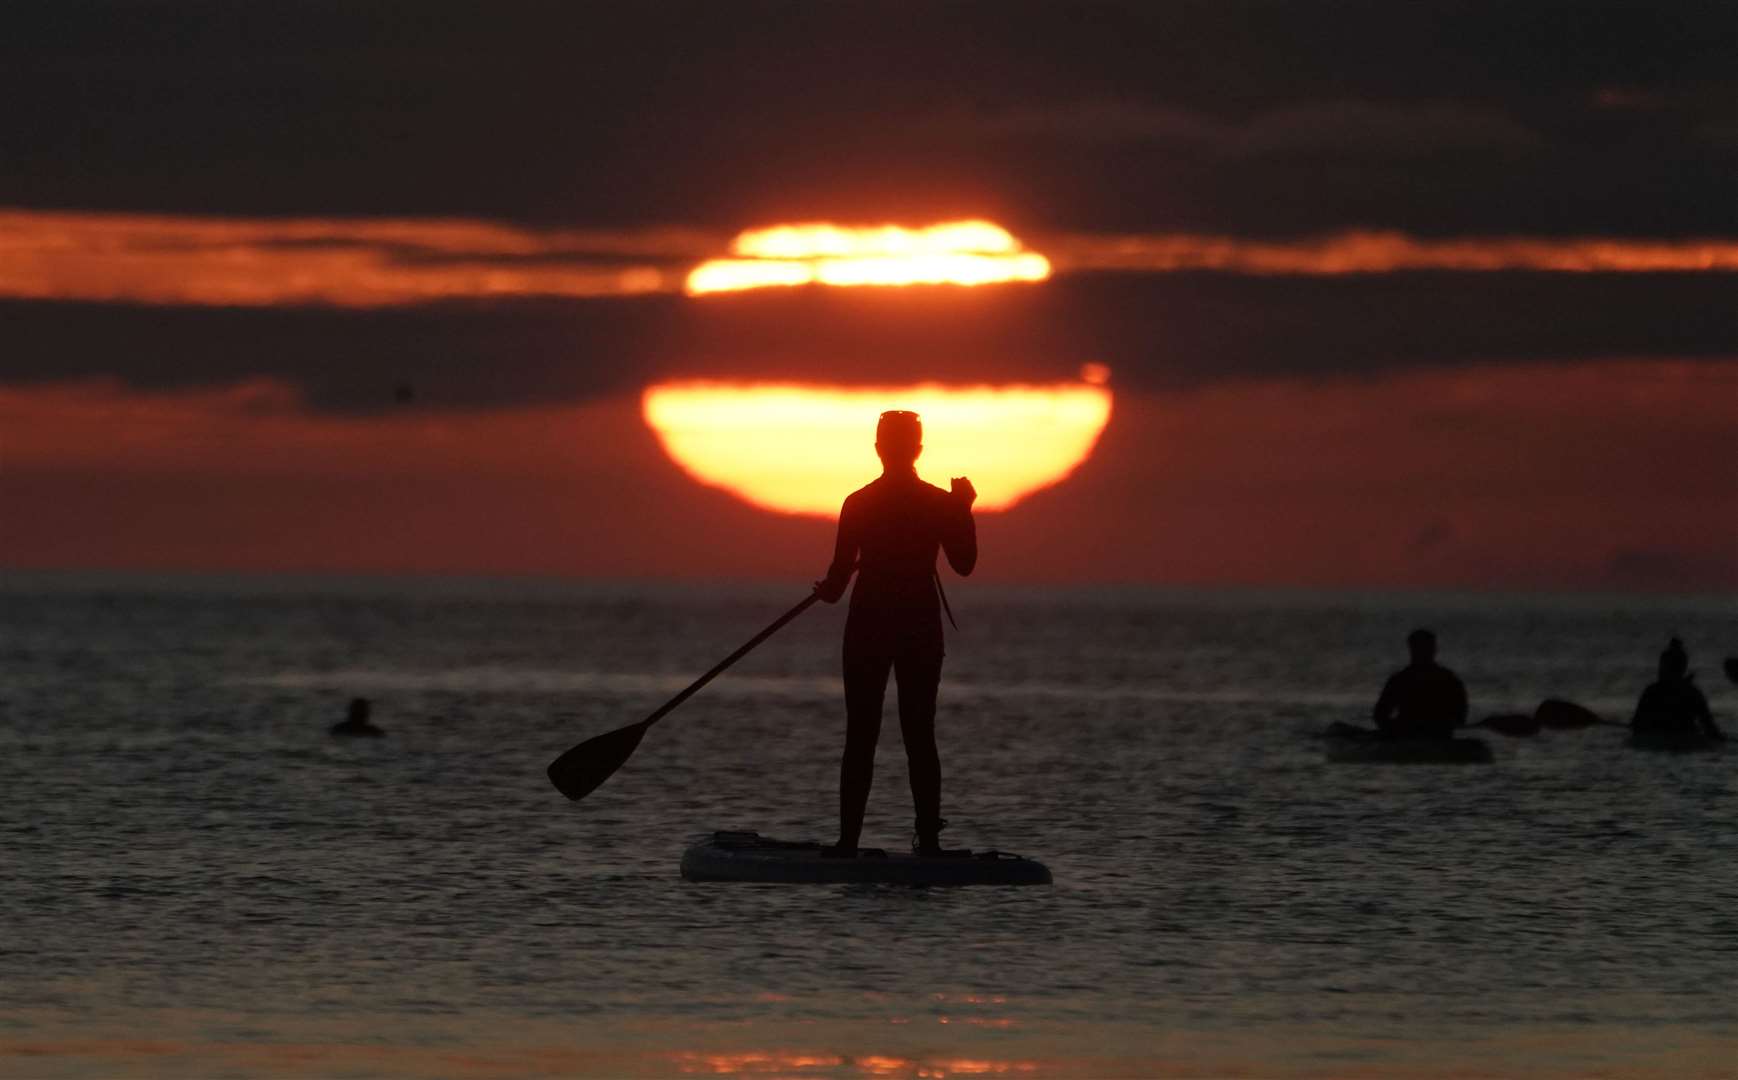 A paddleboarder watches the sunrise at Cullercoats bay in North Tyneside (Owen Humphreys/PA)